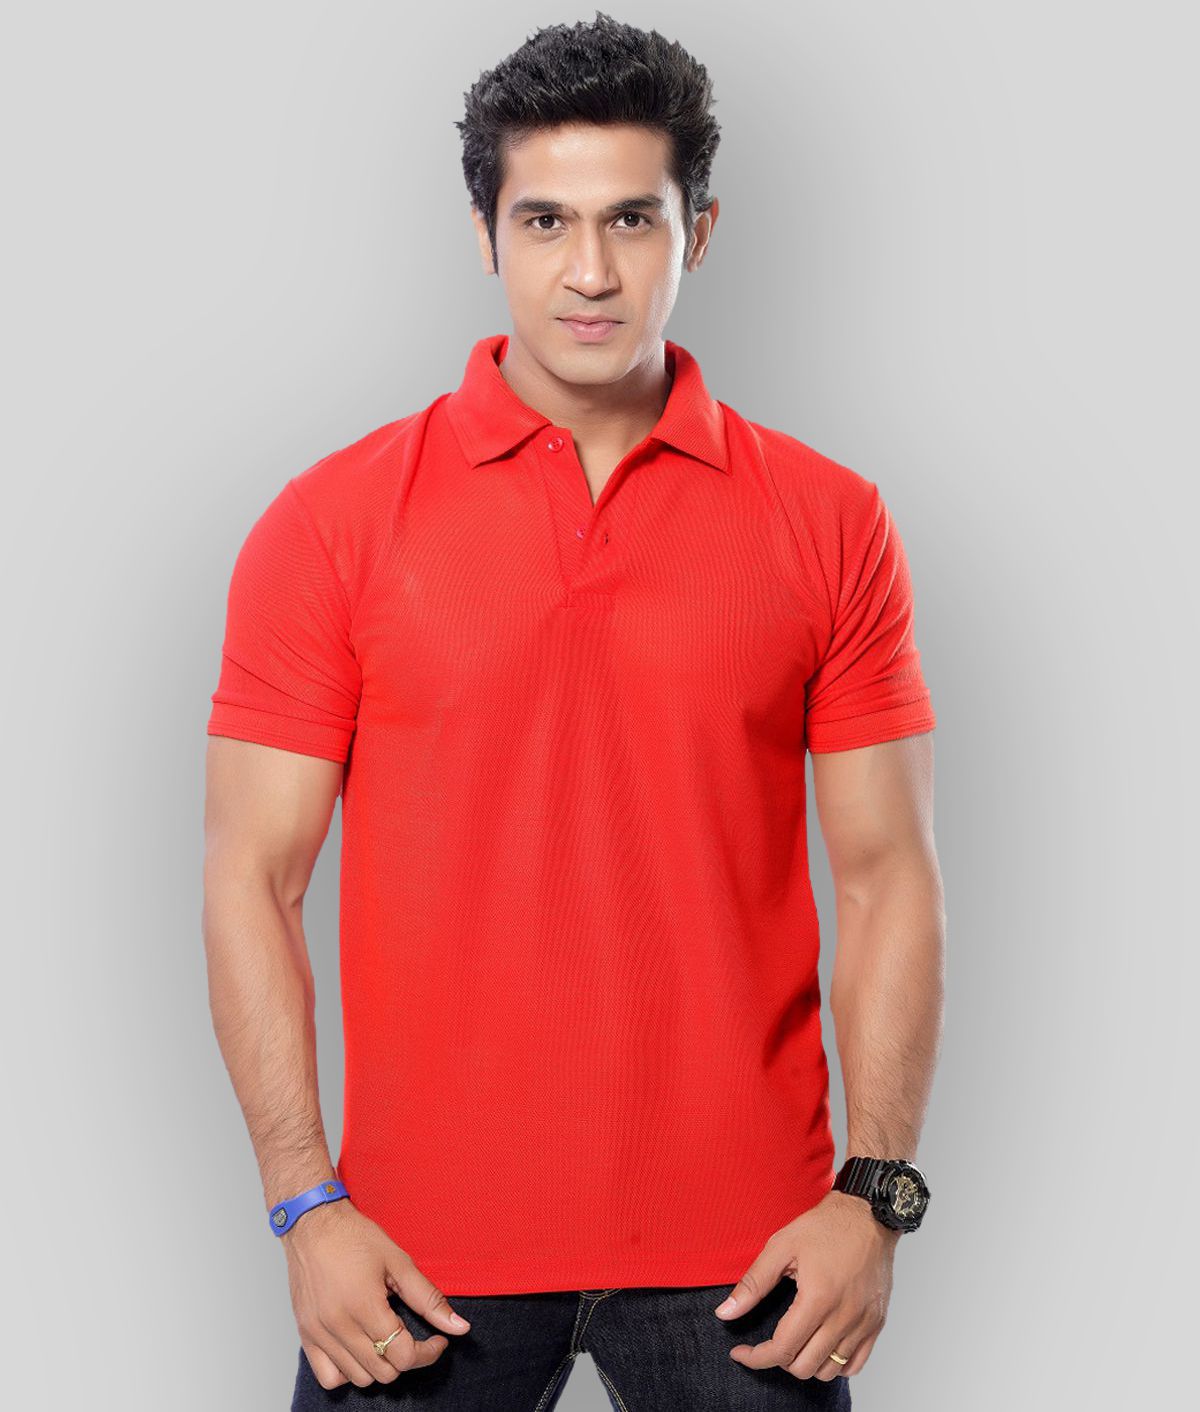     			in365 - Red Cotton Blend Regular Fit Men's Polo T Shirt ( Pack of 1 )